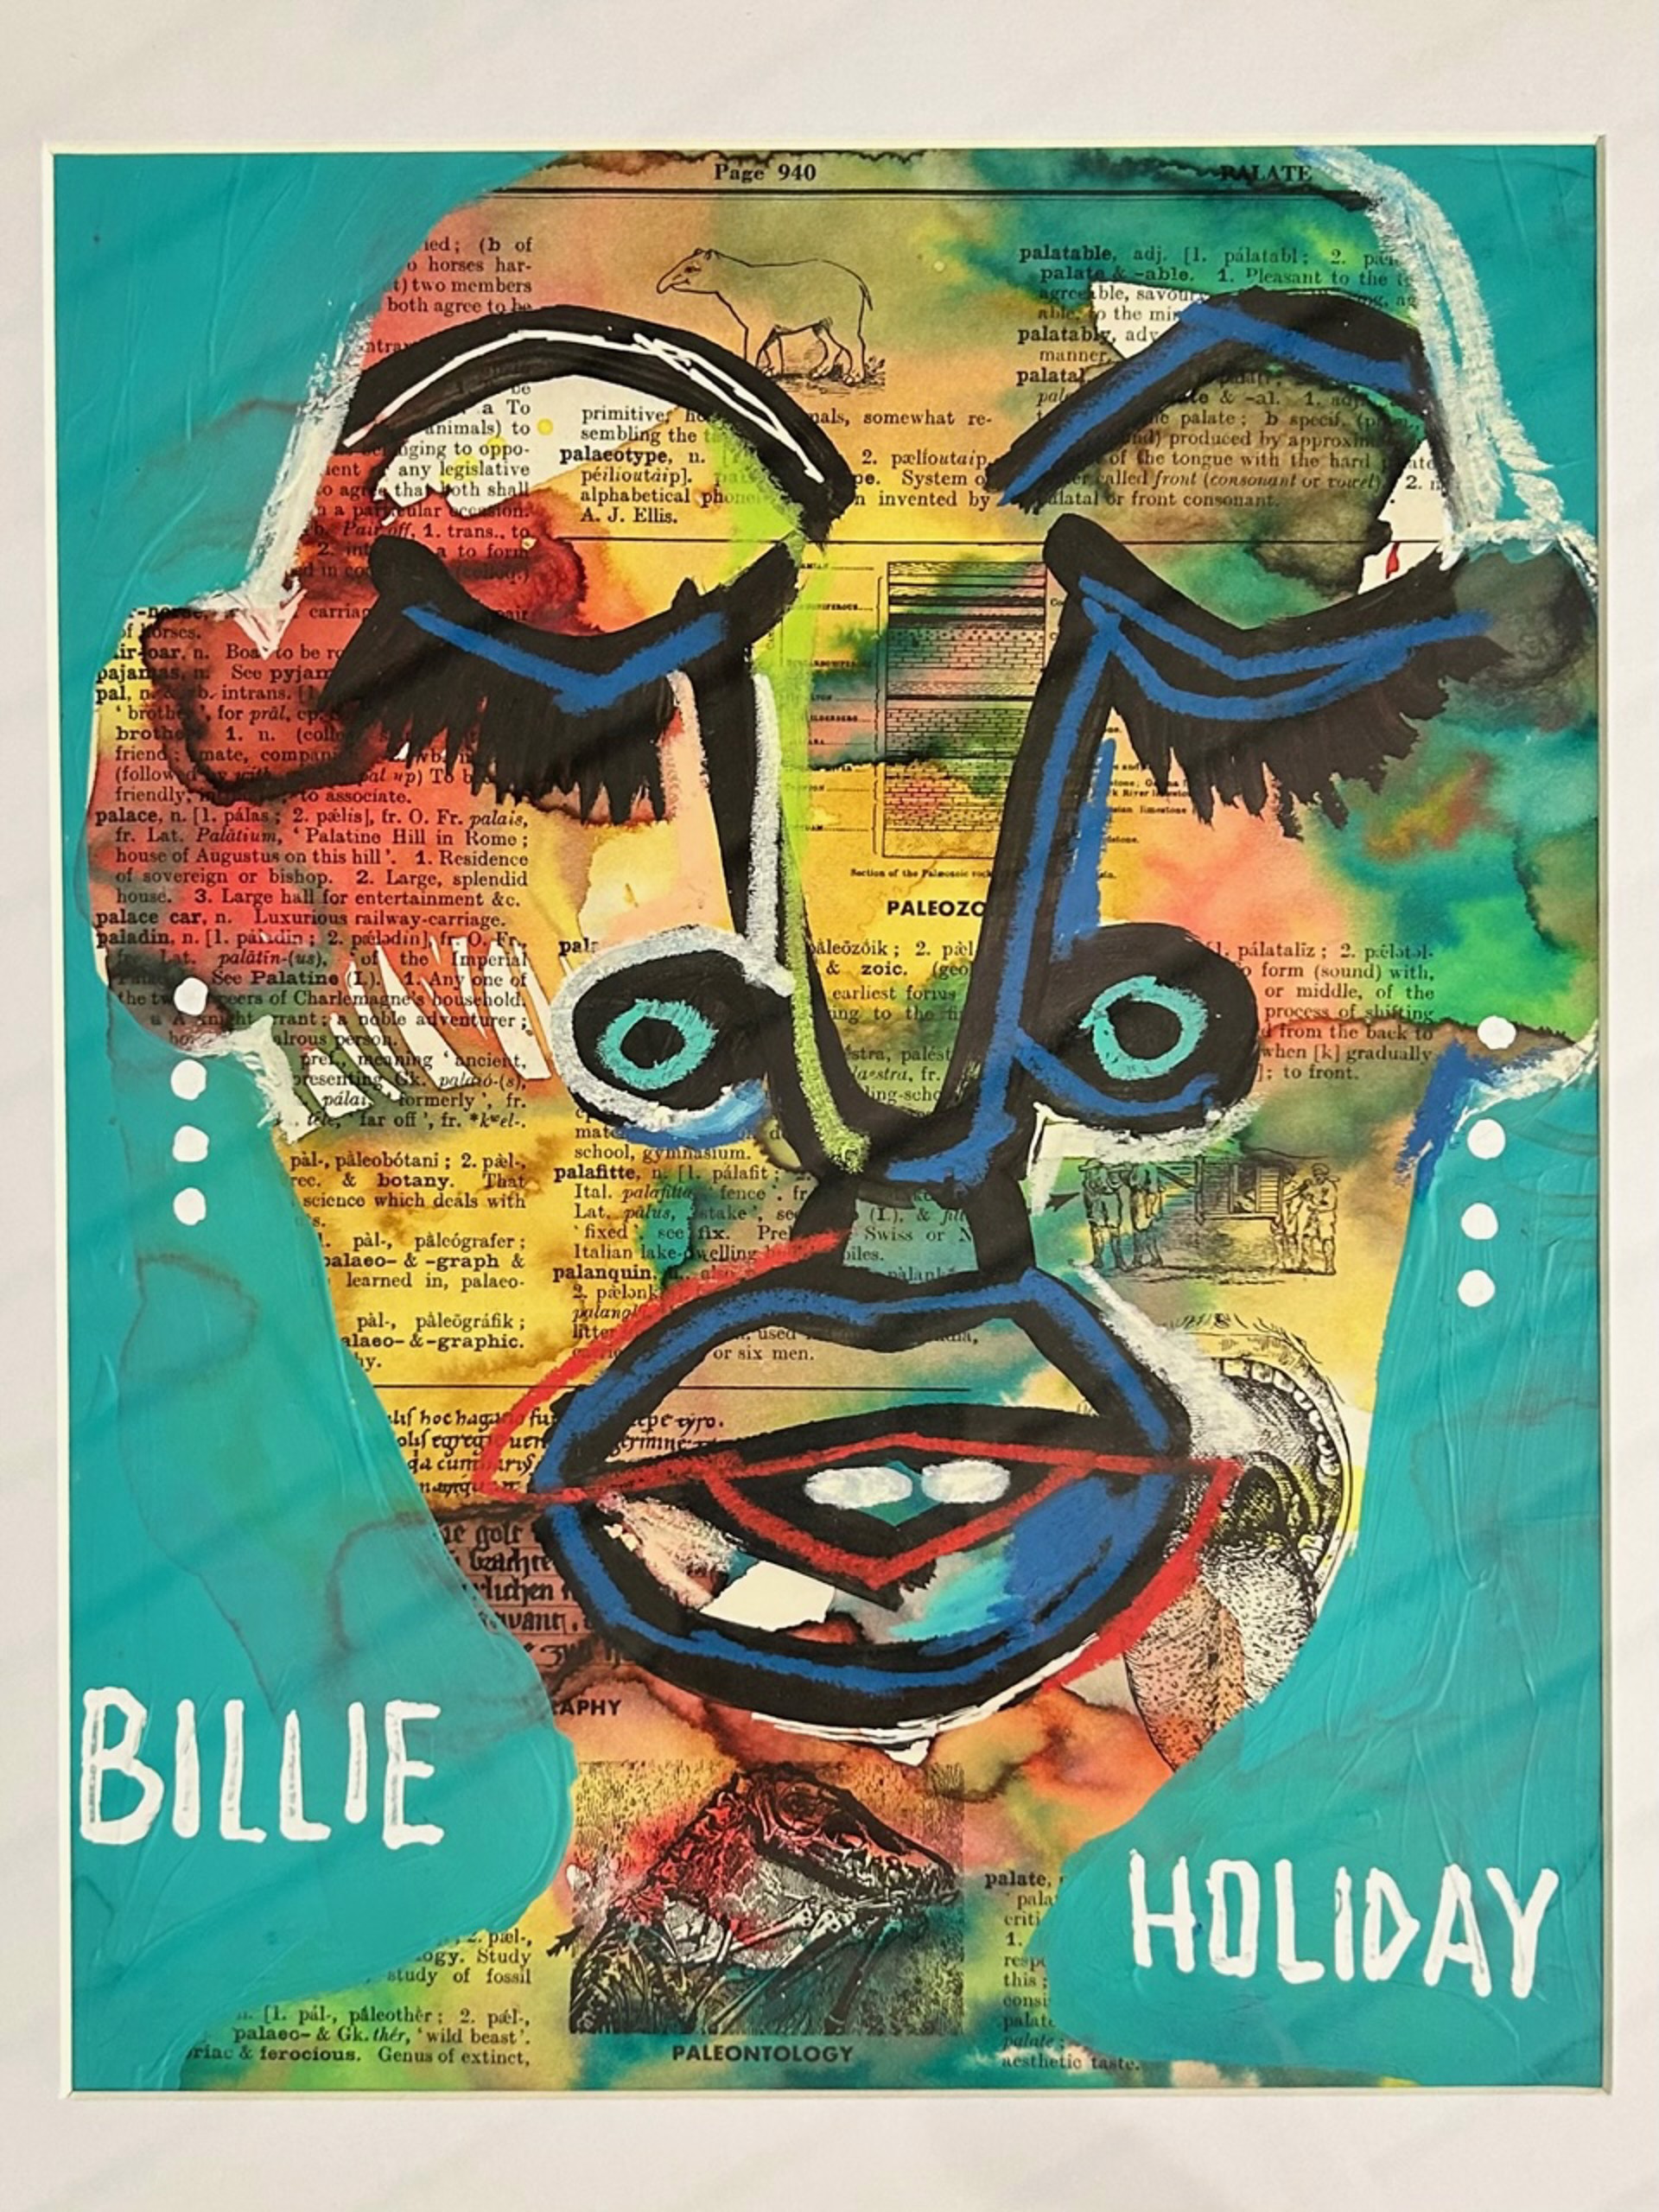 "Billie Holiday" by Easton Davy